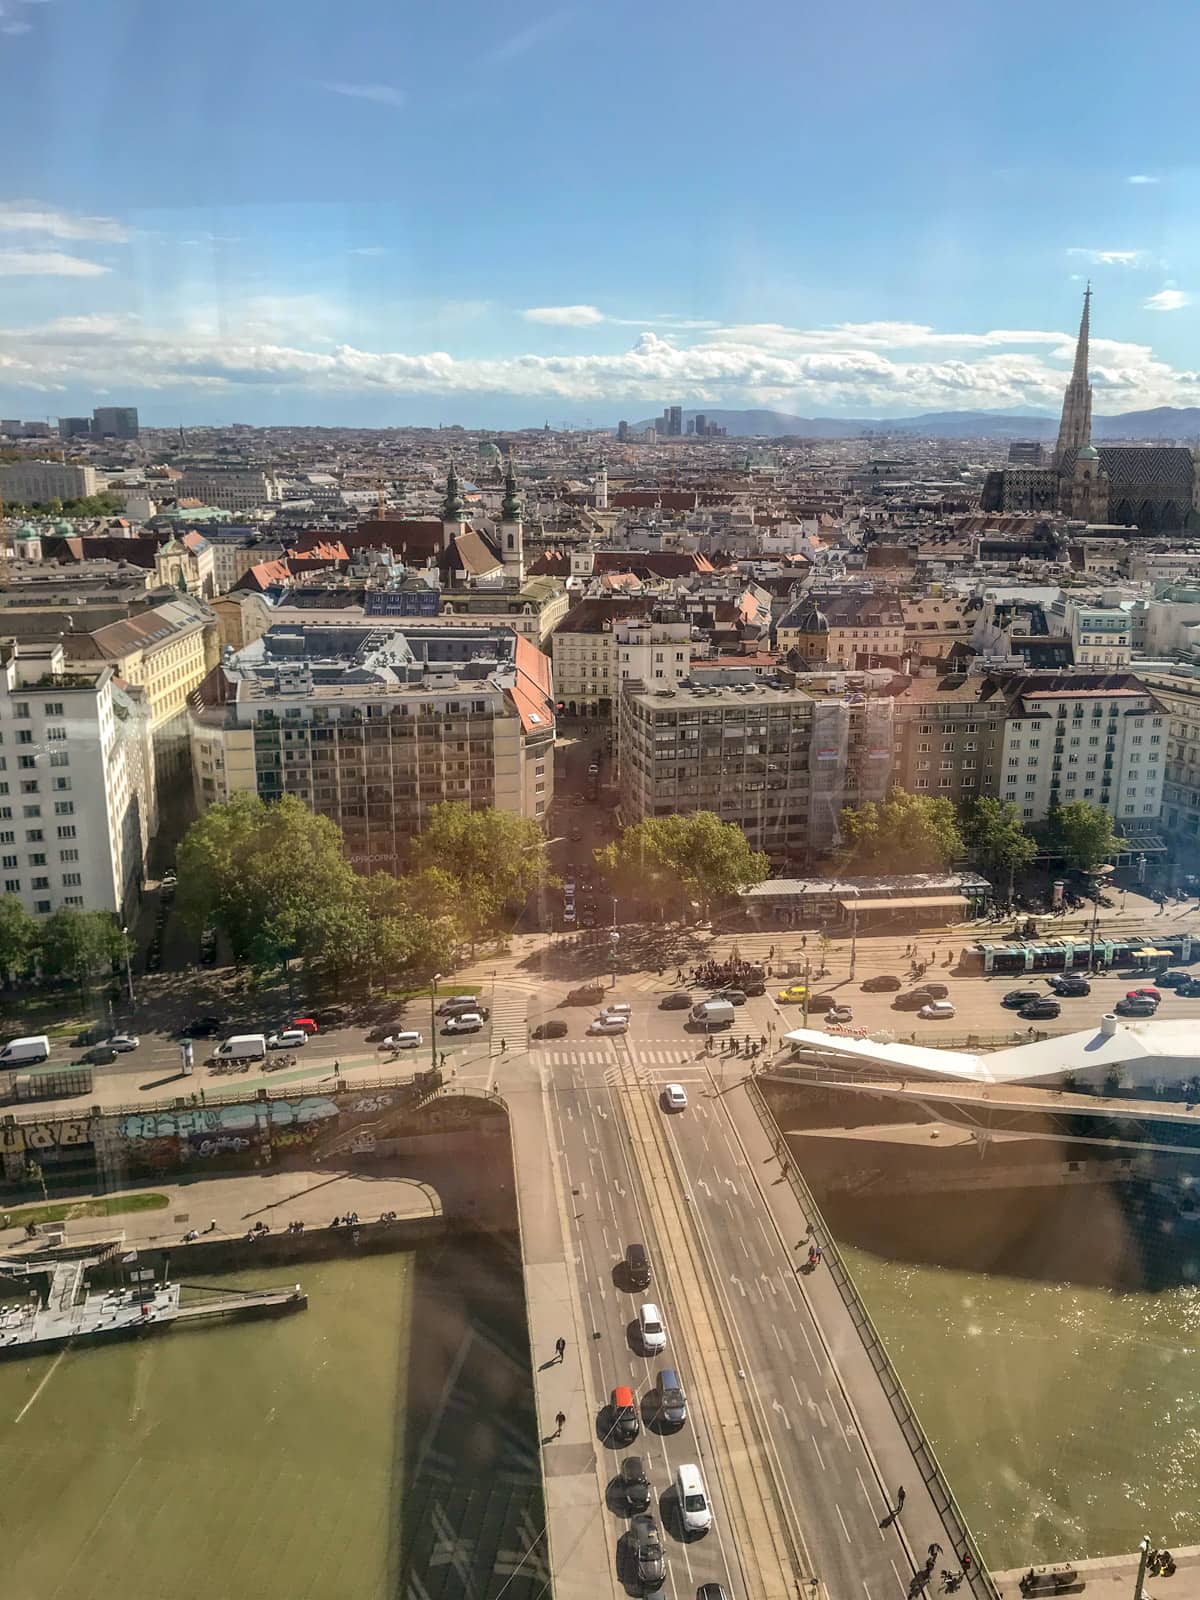 A view of the city of Vienna and its buildings, as seen from the glass window of a hotel